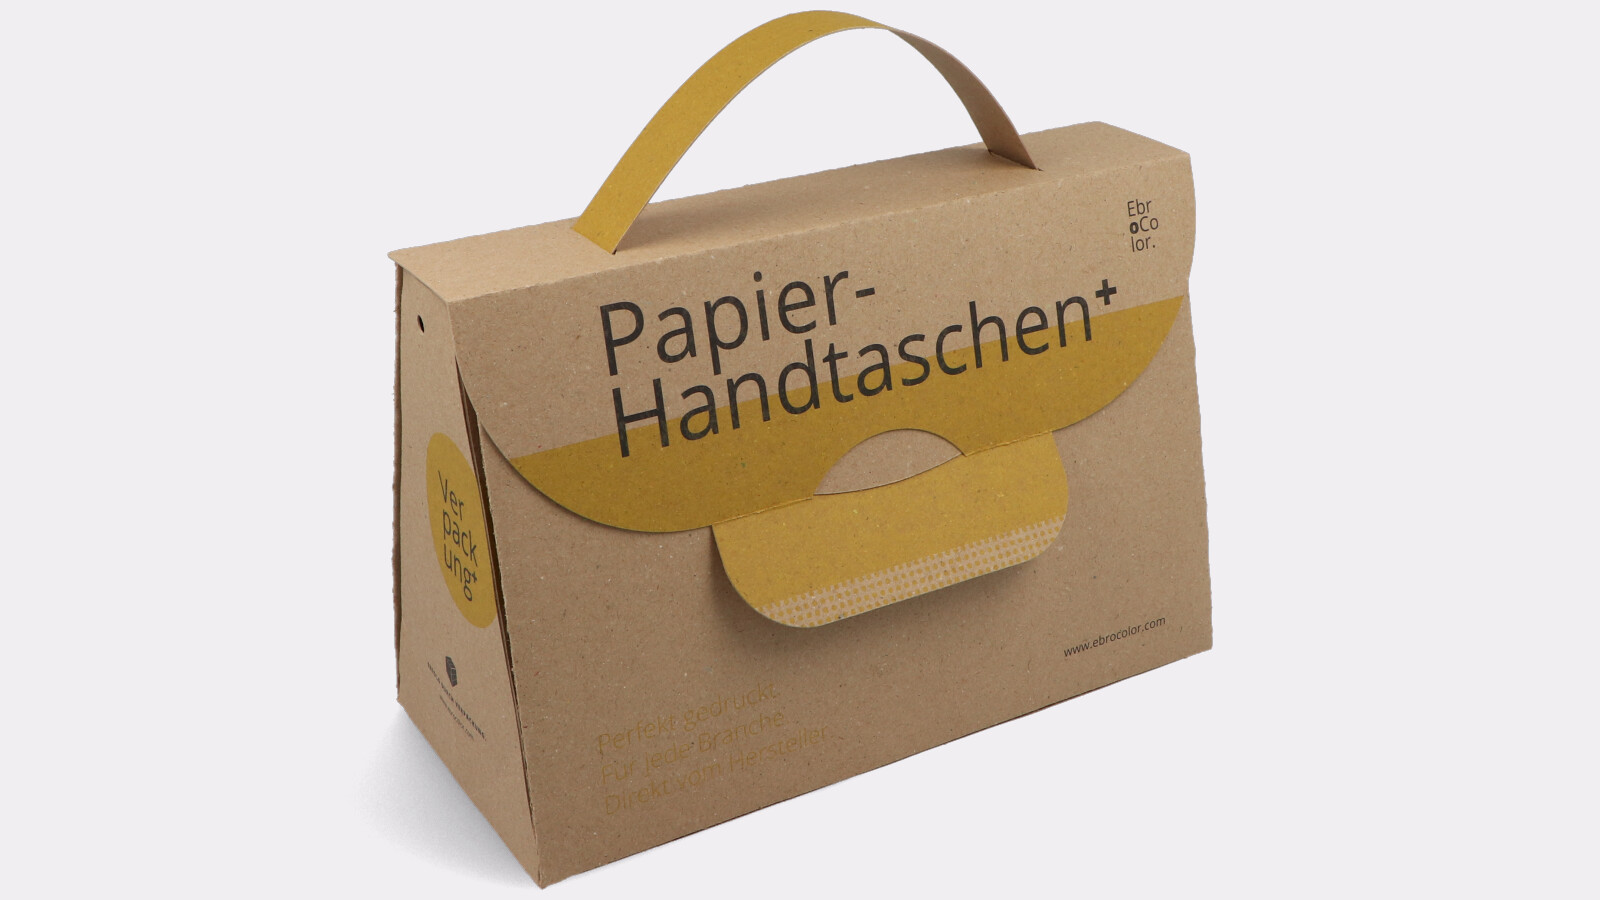 Paper handbag made from recycled cardboard brown